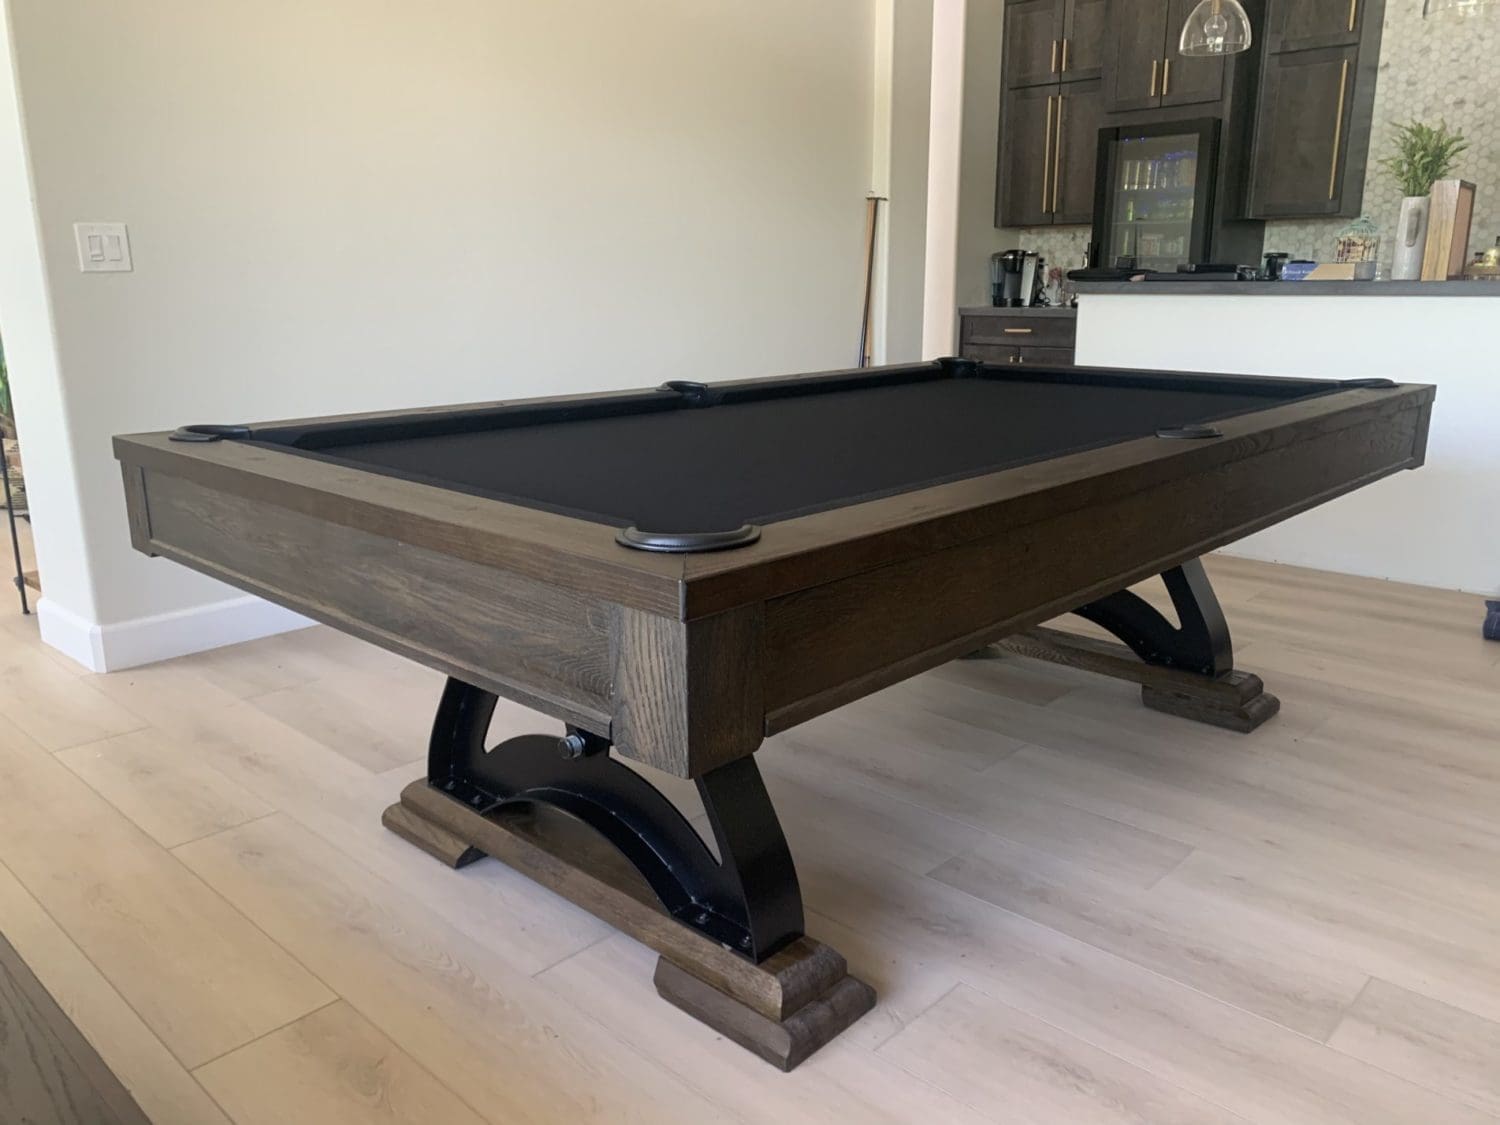 Stage Molester Crush New Eiffel Pool Table with Dining Top Option - Sure Shot Billiards